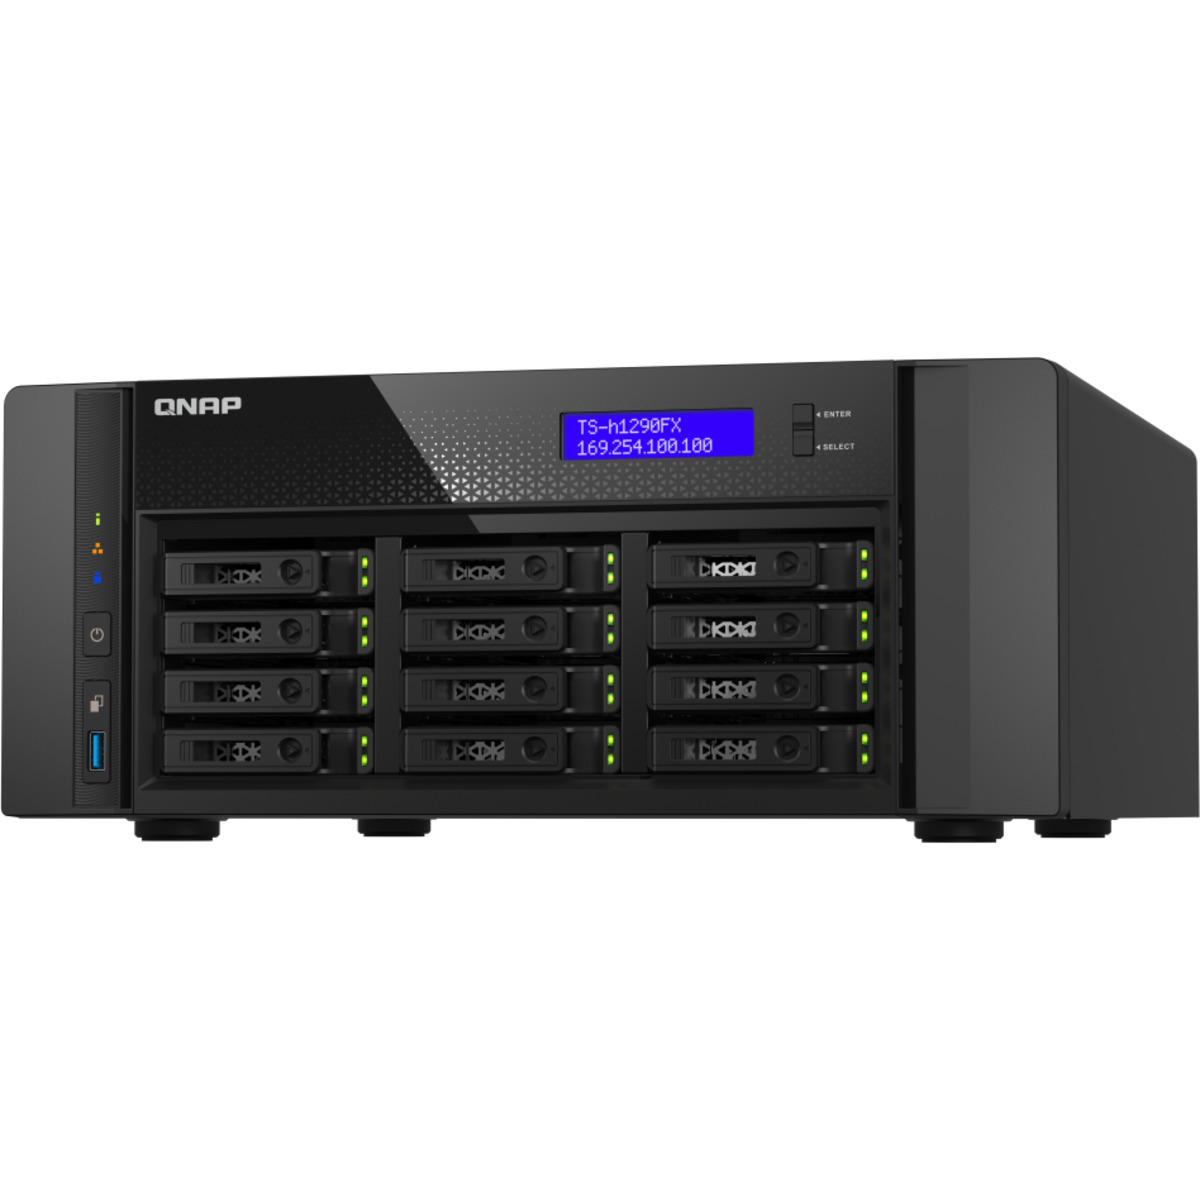 QNAP TS-h1290FX QuTS 7302P hero Edition 18tb 12-Bay Desktop Large Business / Enterprise NAS - Network Attached Storage Device 9x2tb Crucial MX500 CT2000MX500SSD1 2.5 560/510MB/s SATA 6Gb/s SSD CONSUMER Class Drives Installed - Burn-In Tested TS-h1290FX QuTS 7302P hero Edition